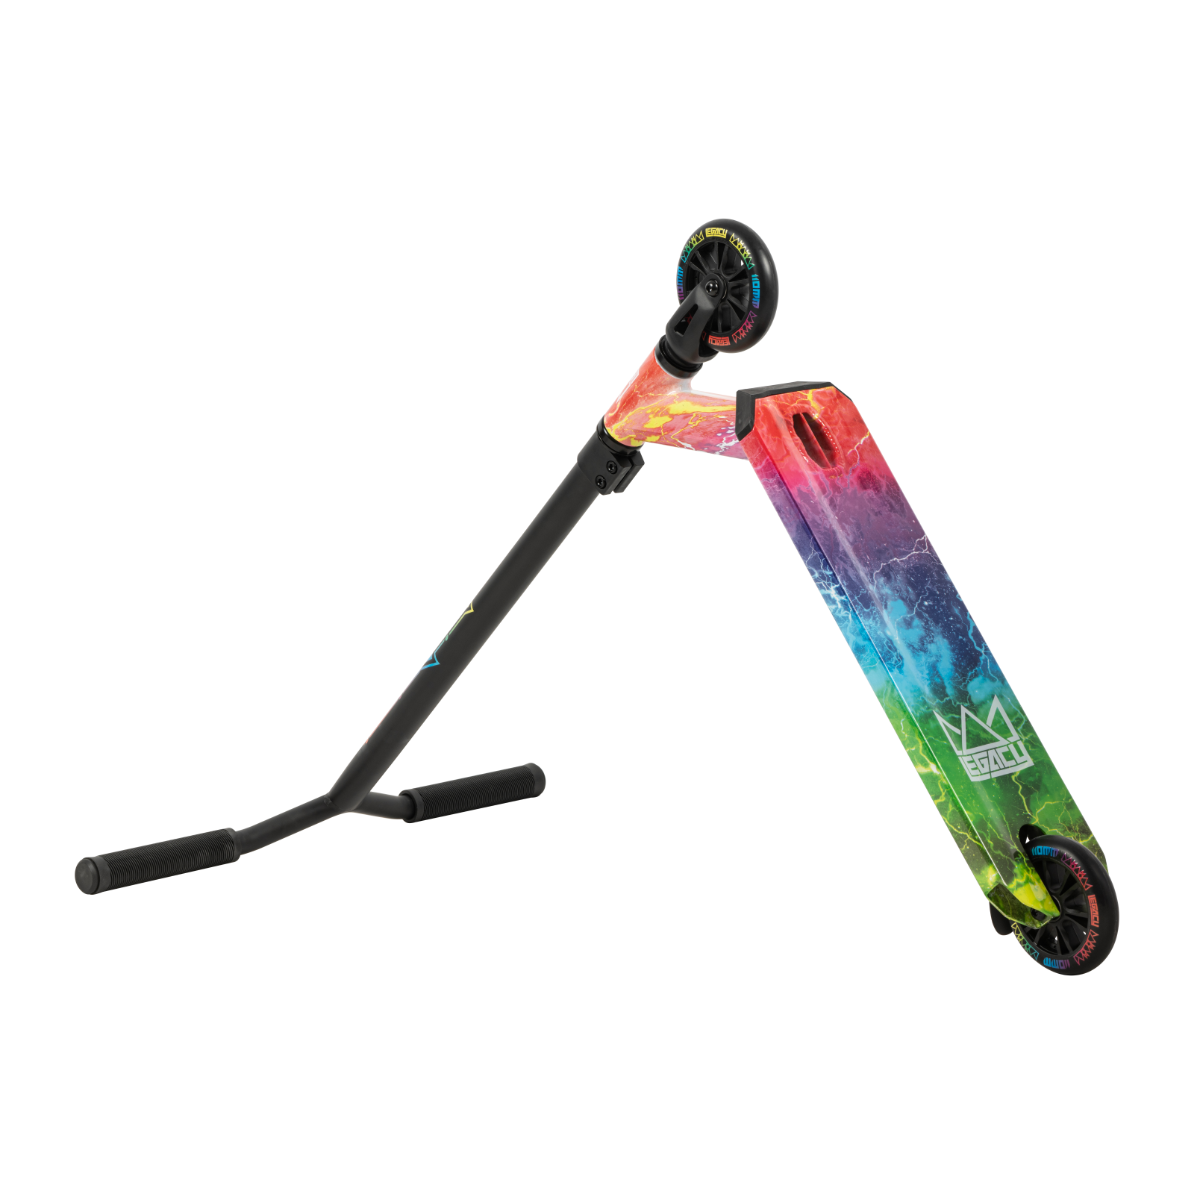 Legacy Hydro Drip Complete Stunt Scooter - Hectic Rainbow - Graphic